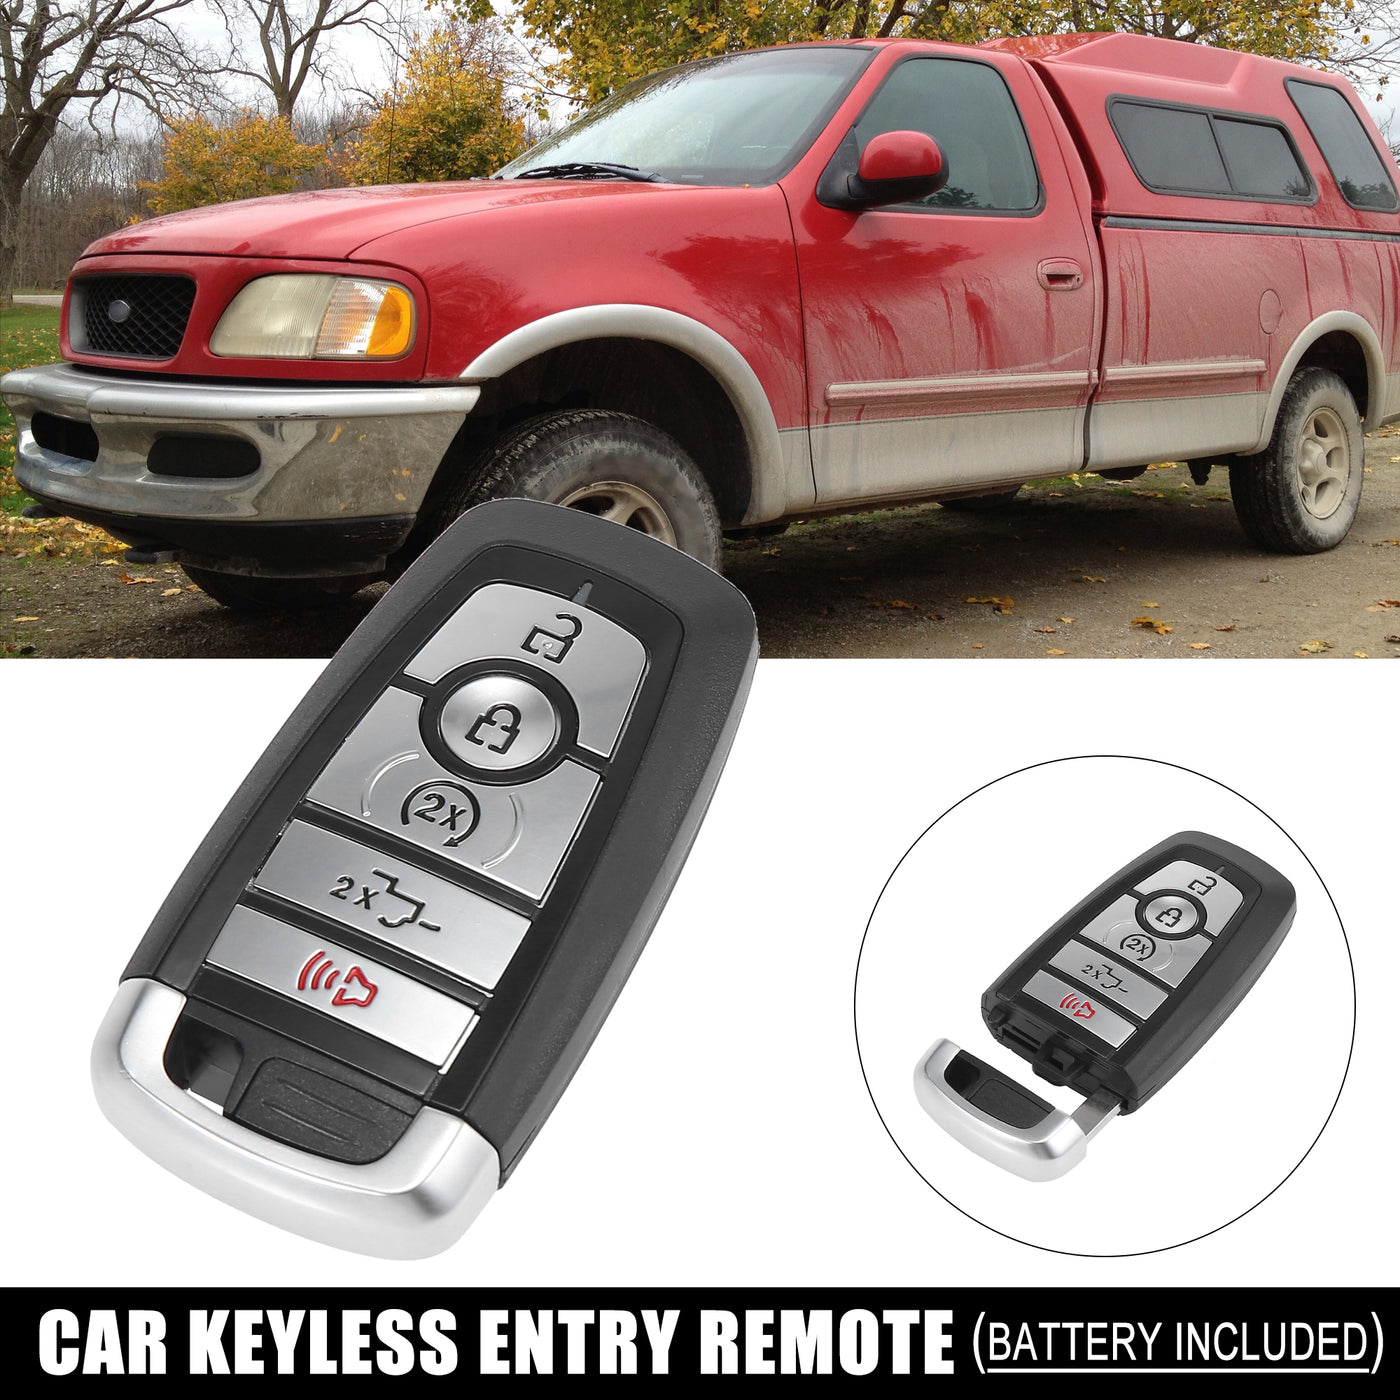 X AUTOHAUX 902MHz M3N-A2C93142600 Replacement Keyless Entry Remote Car Key Fob for Ford F-150 F-250 F-350 F-450 F-550 2018-2022 164-R8166